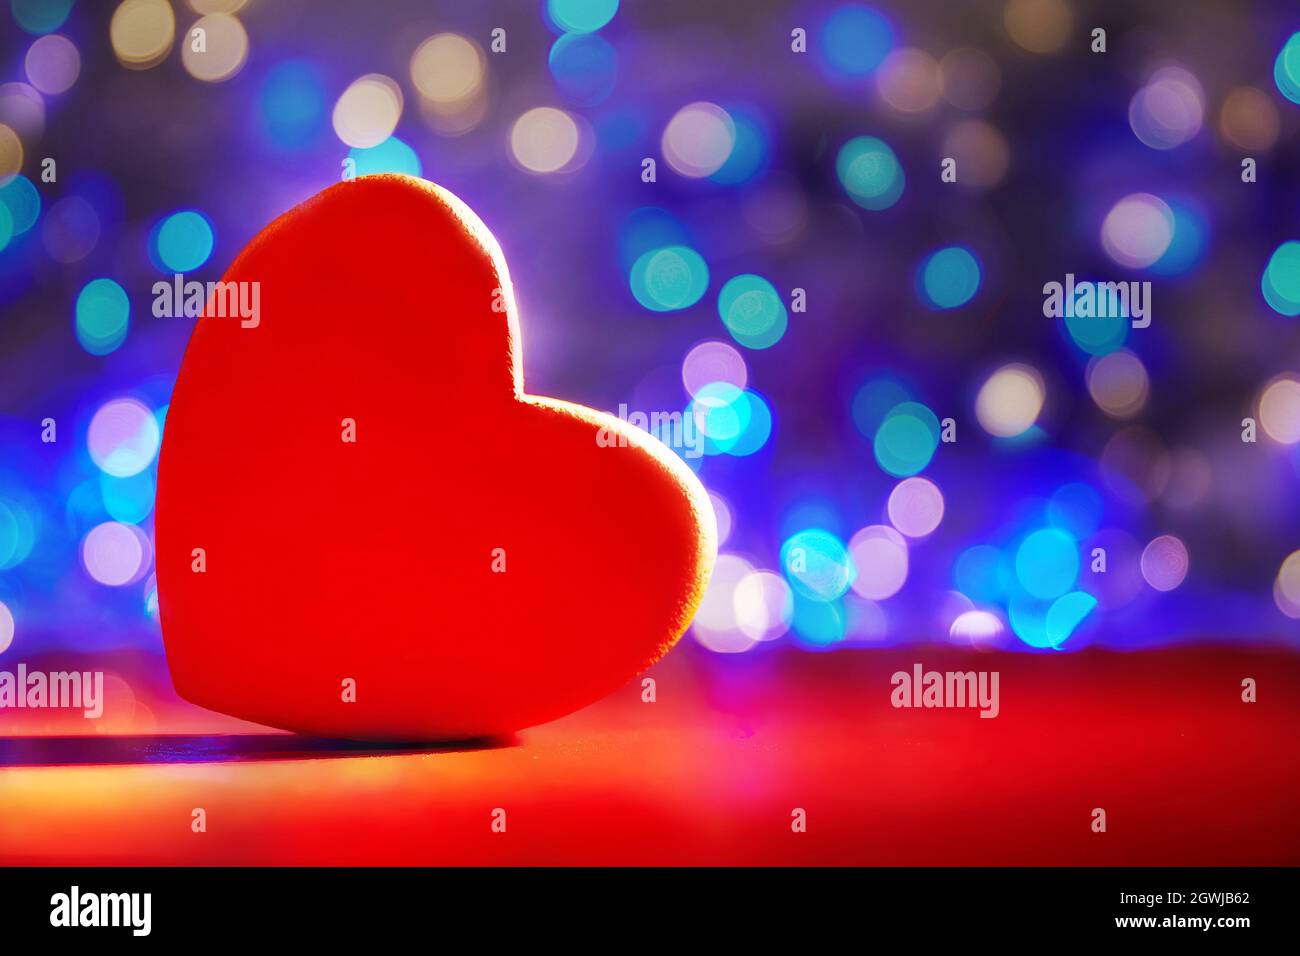 Greeting Card For Valentine's Day. Close-up Red Heart On Defocus ...